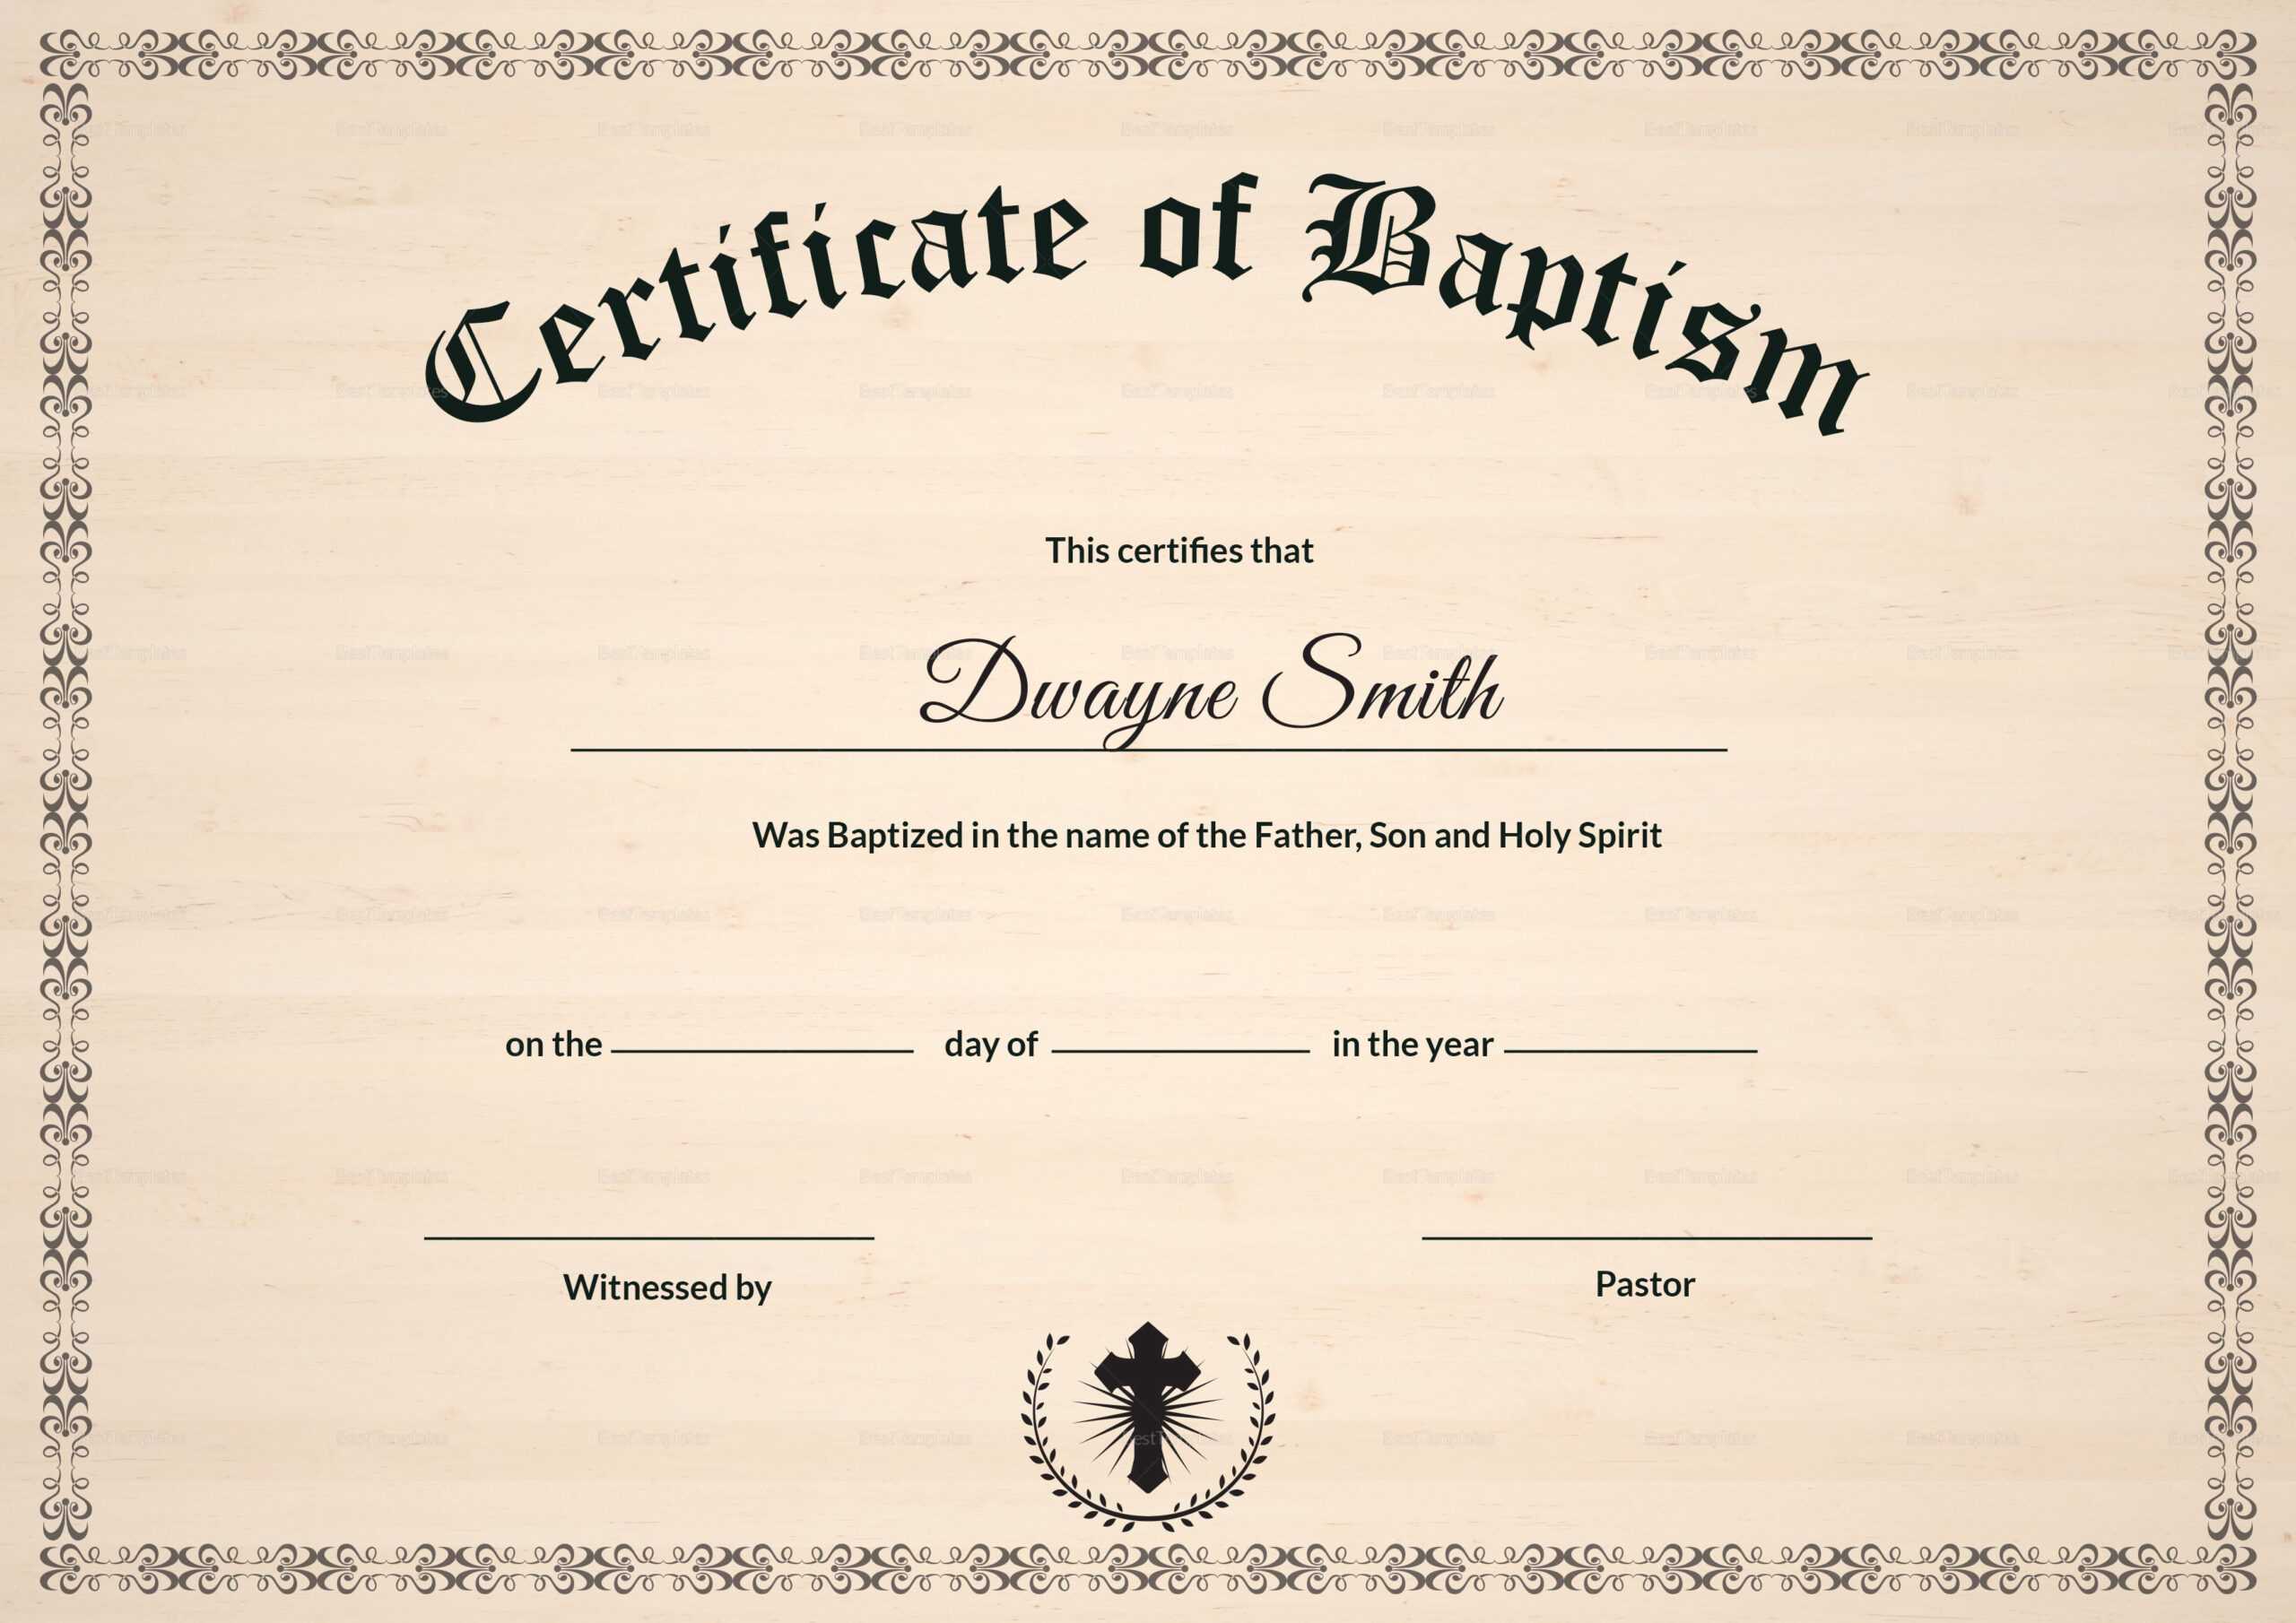 001 Certificate Of Baptism Template Unique Ideas Catholic In Christian